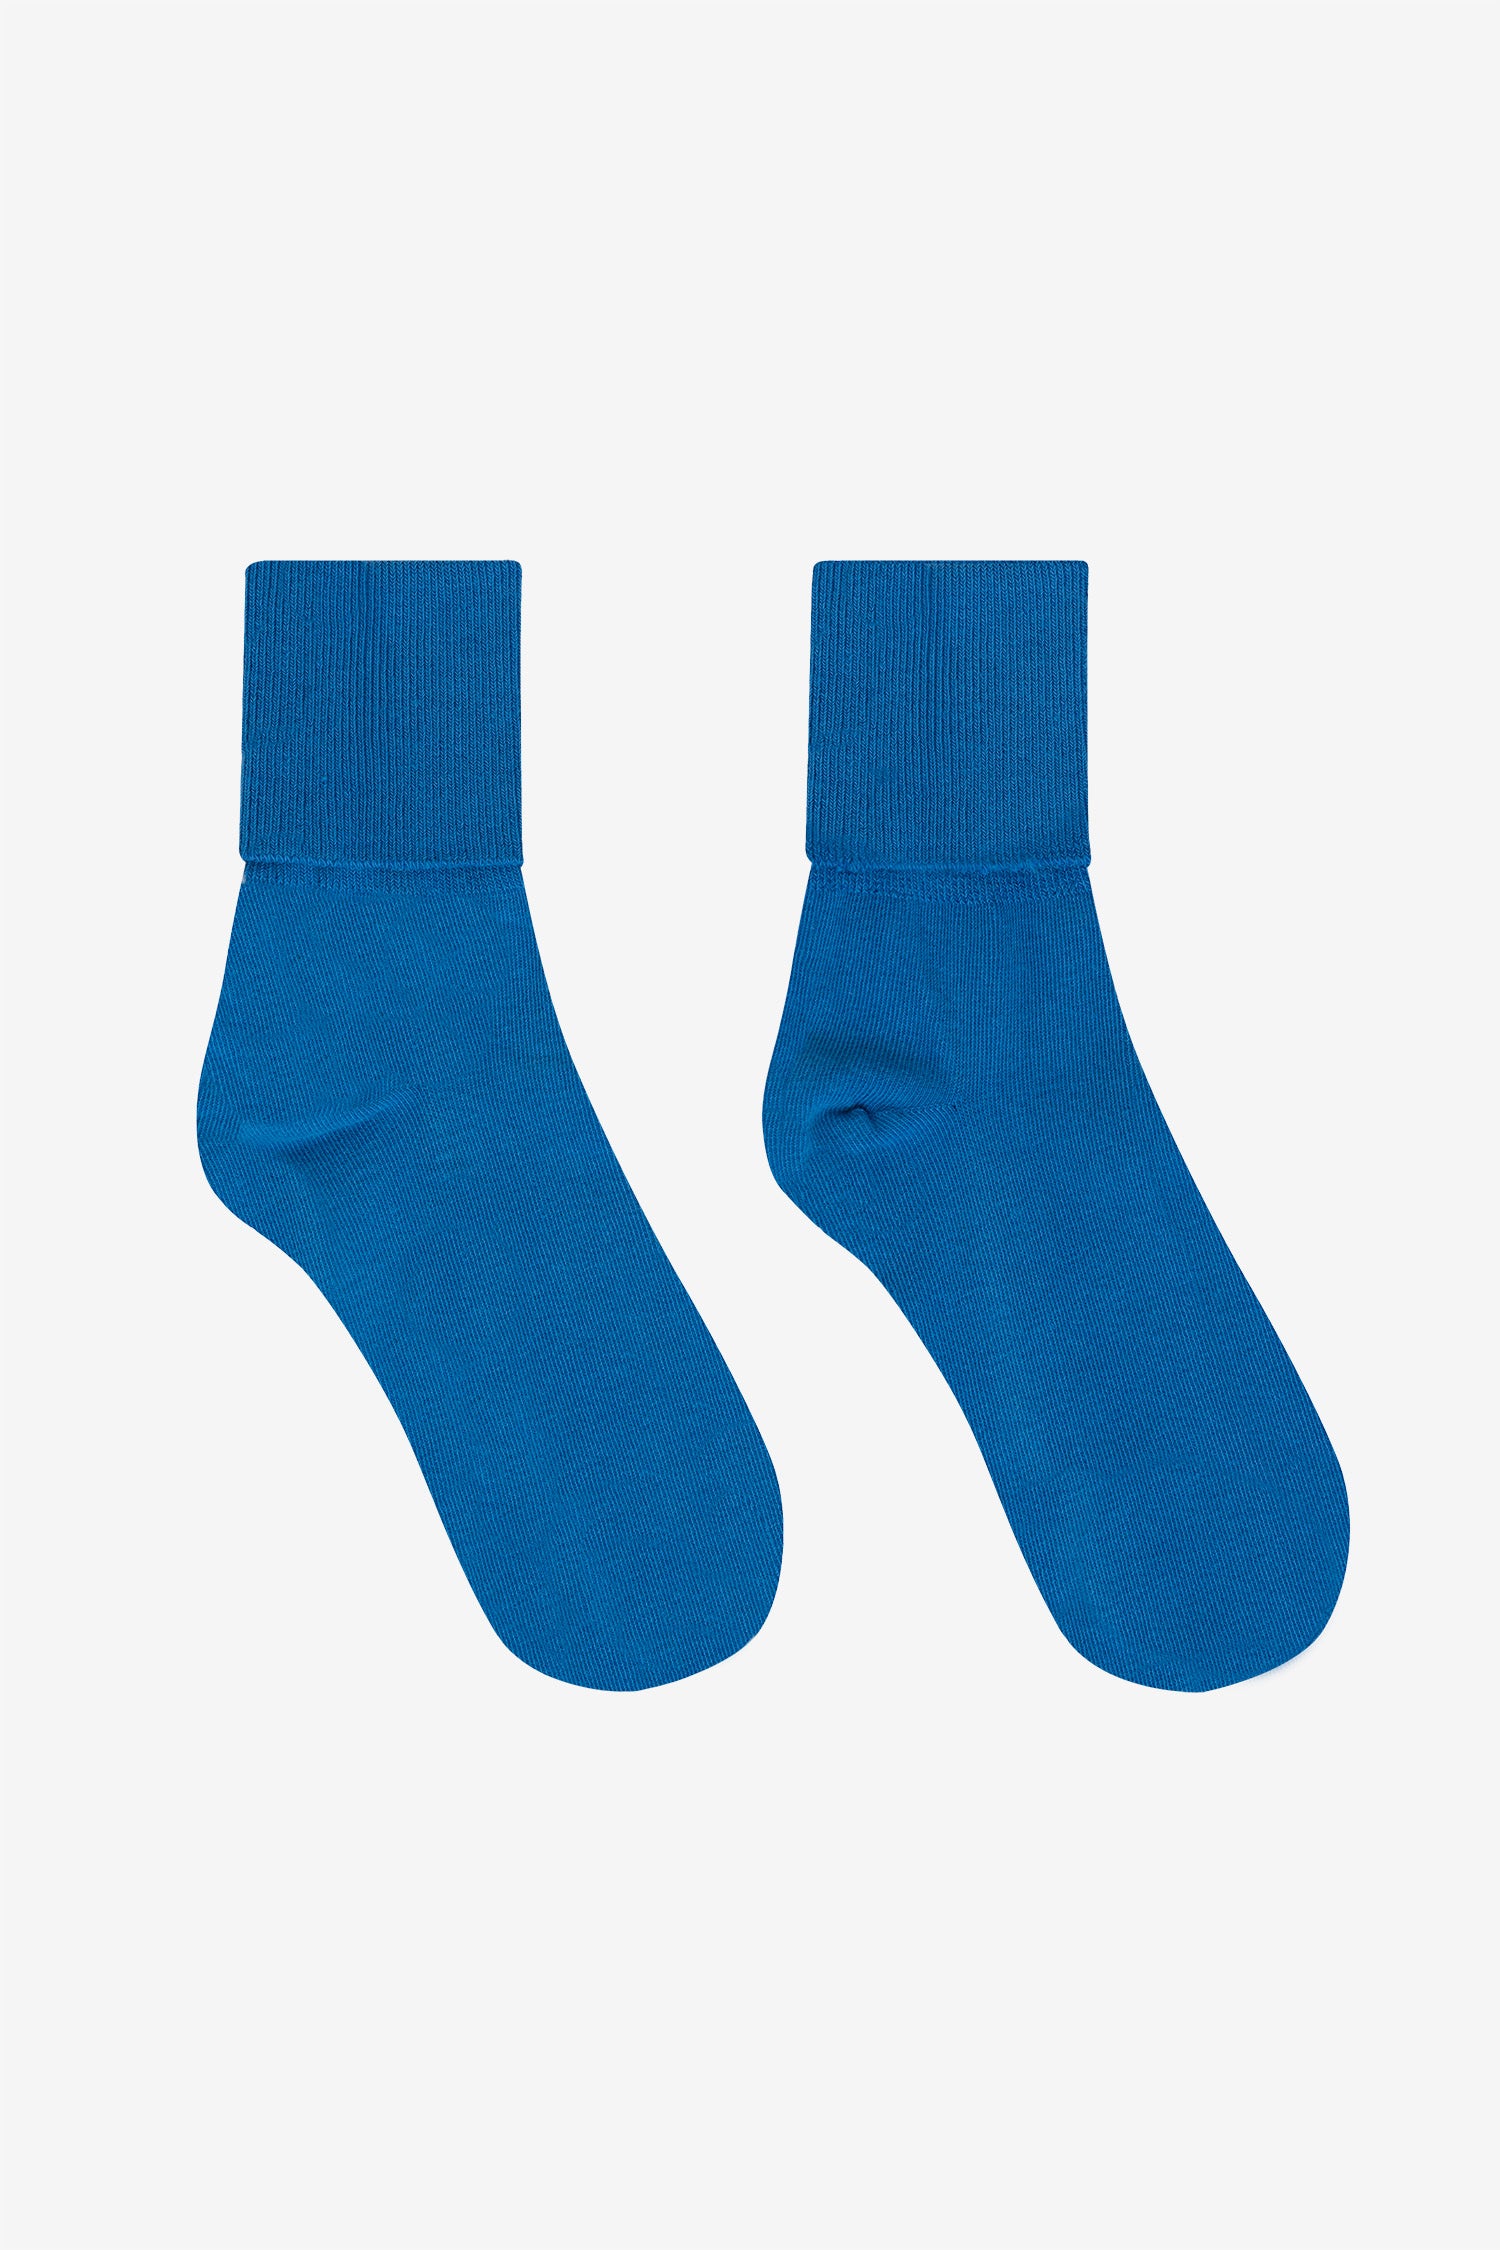 Second Life Marketplace - Lv Navy Blue Youth Ripped Socks